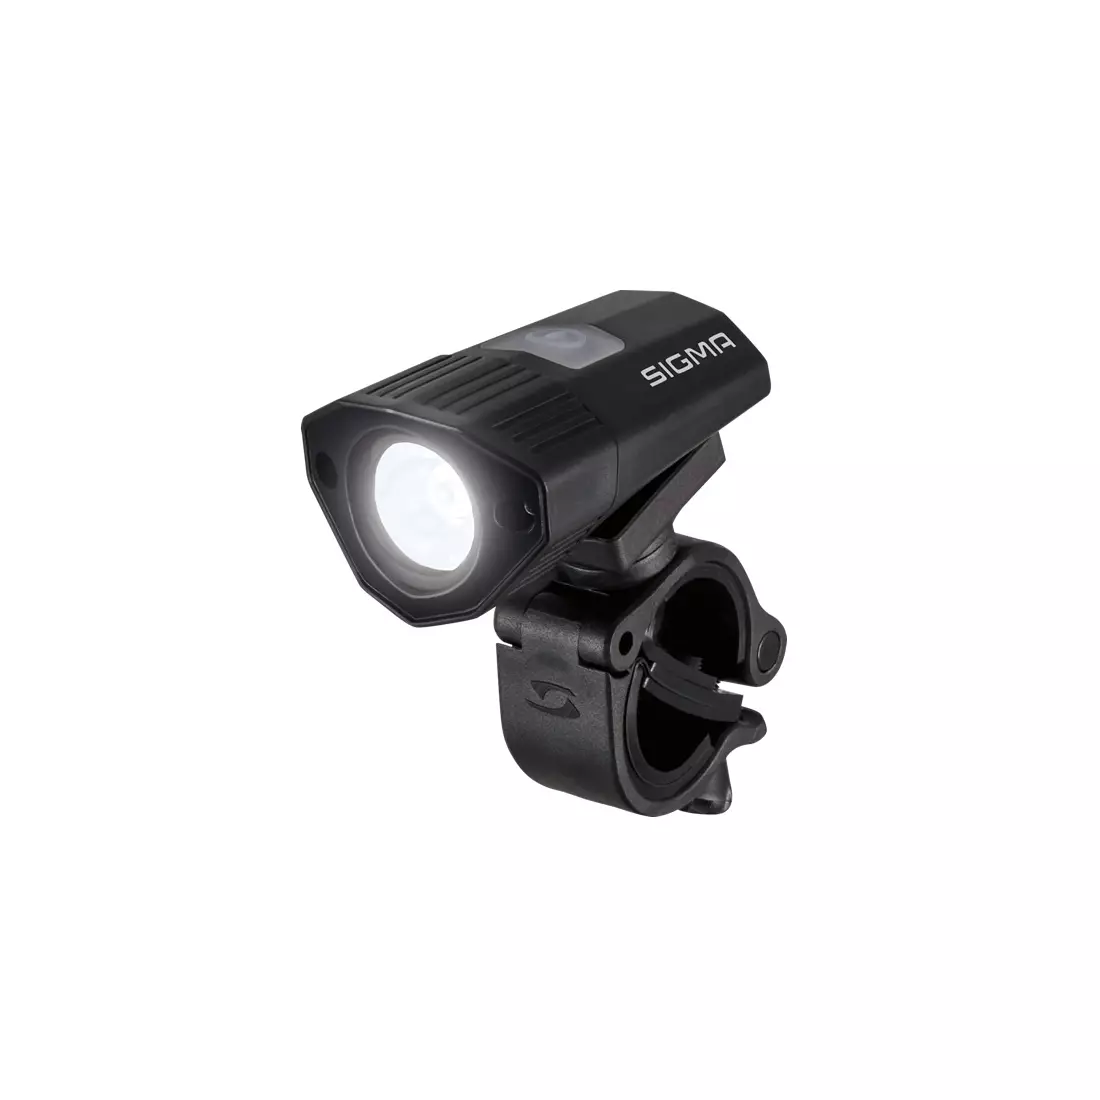 SIGMA front bicycle lamp BUSTER 100 black